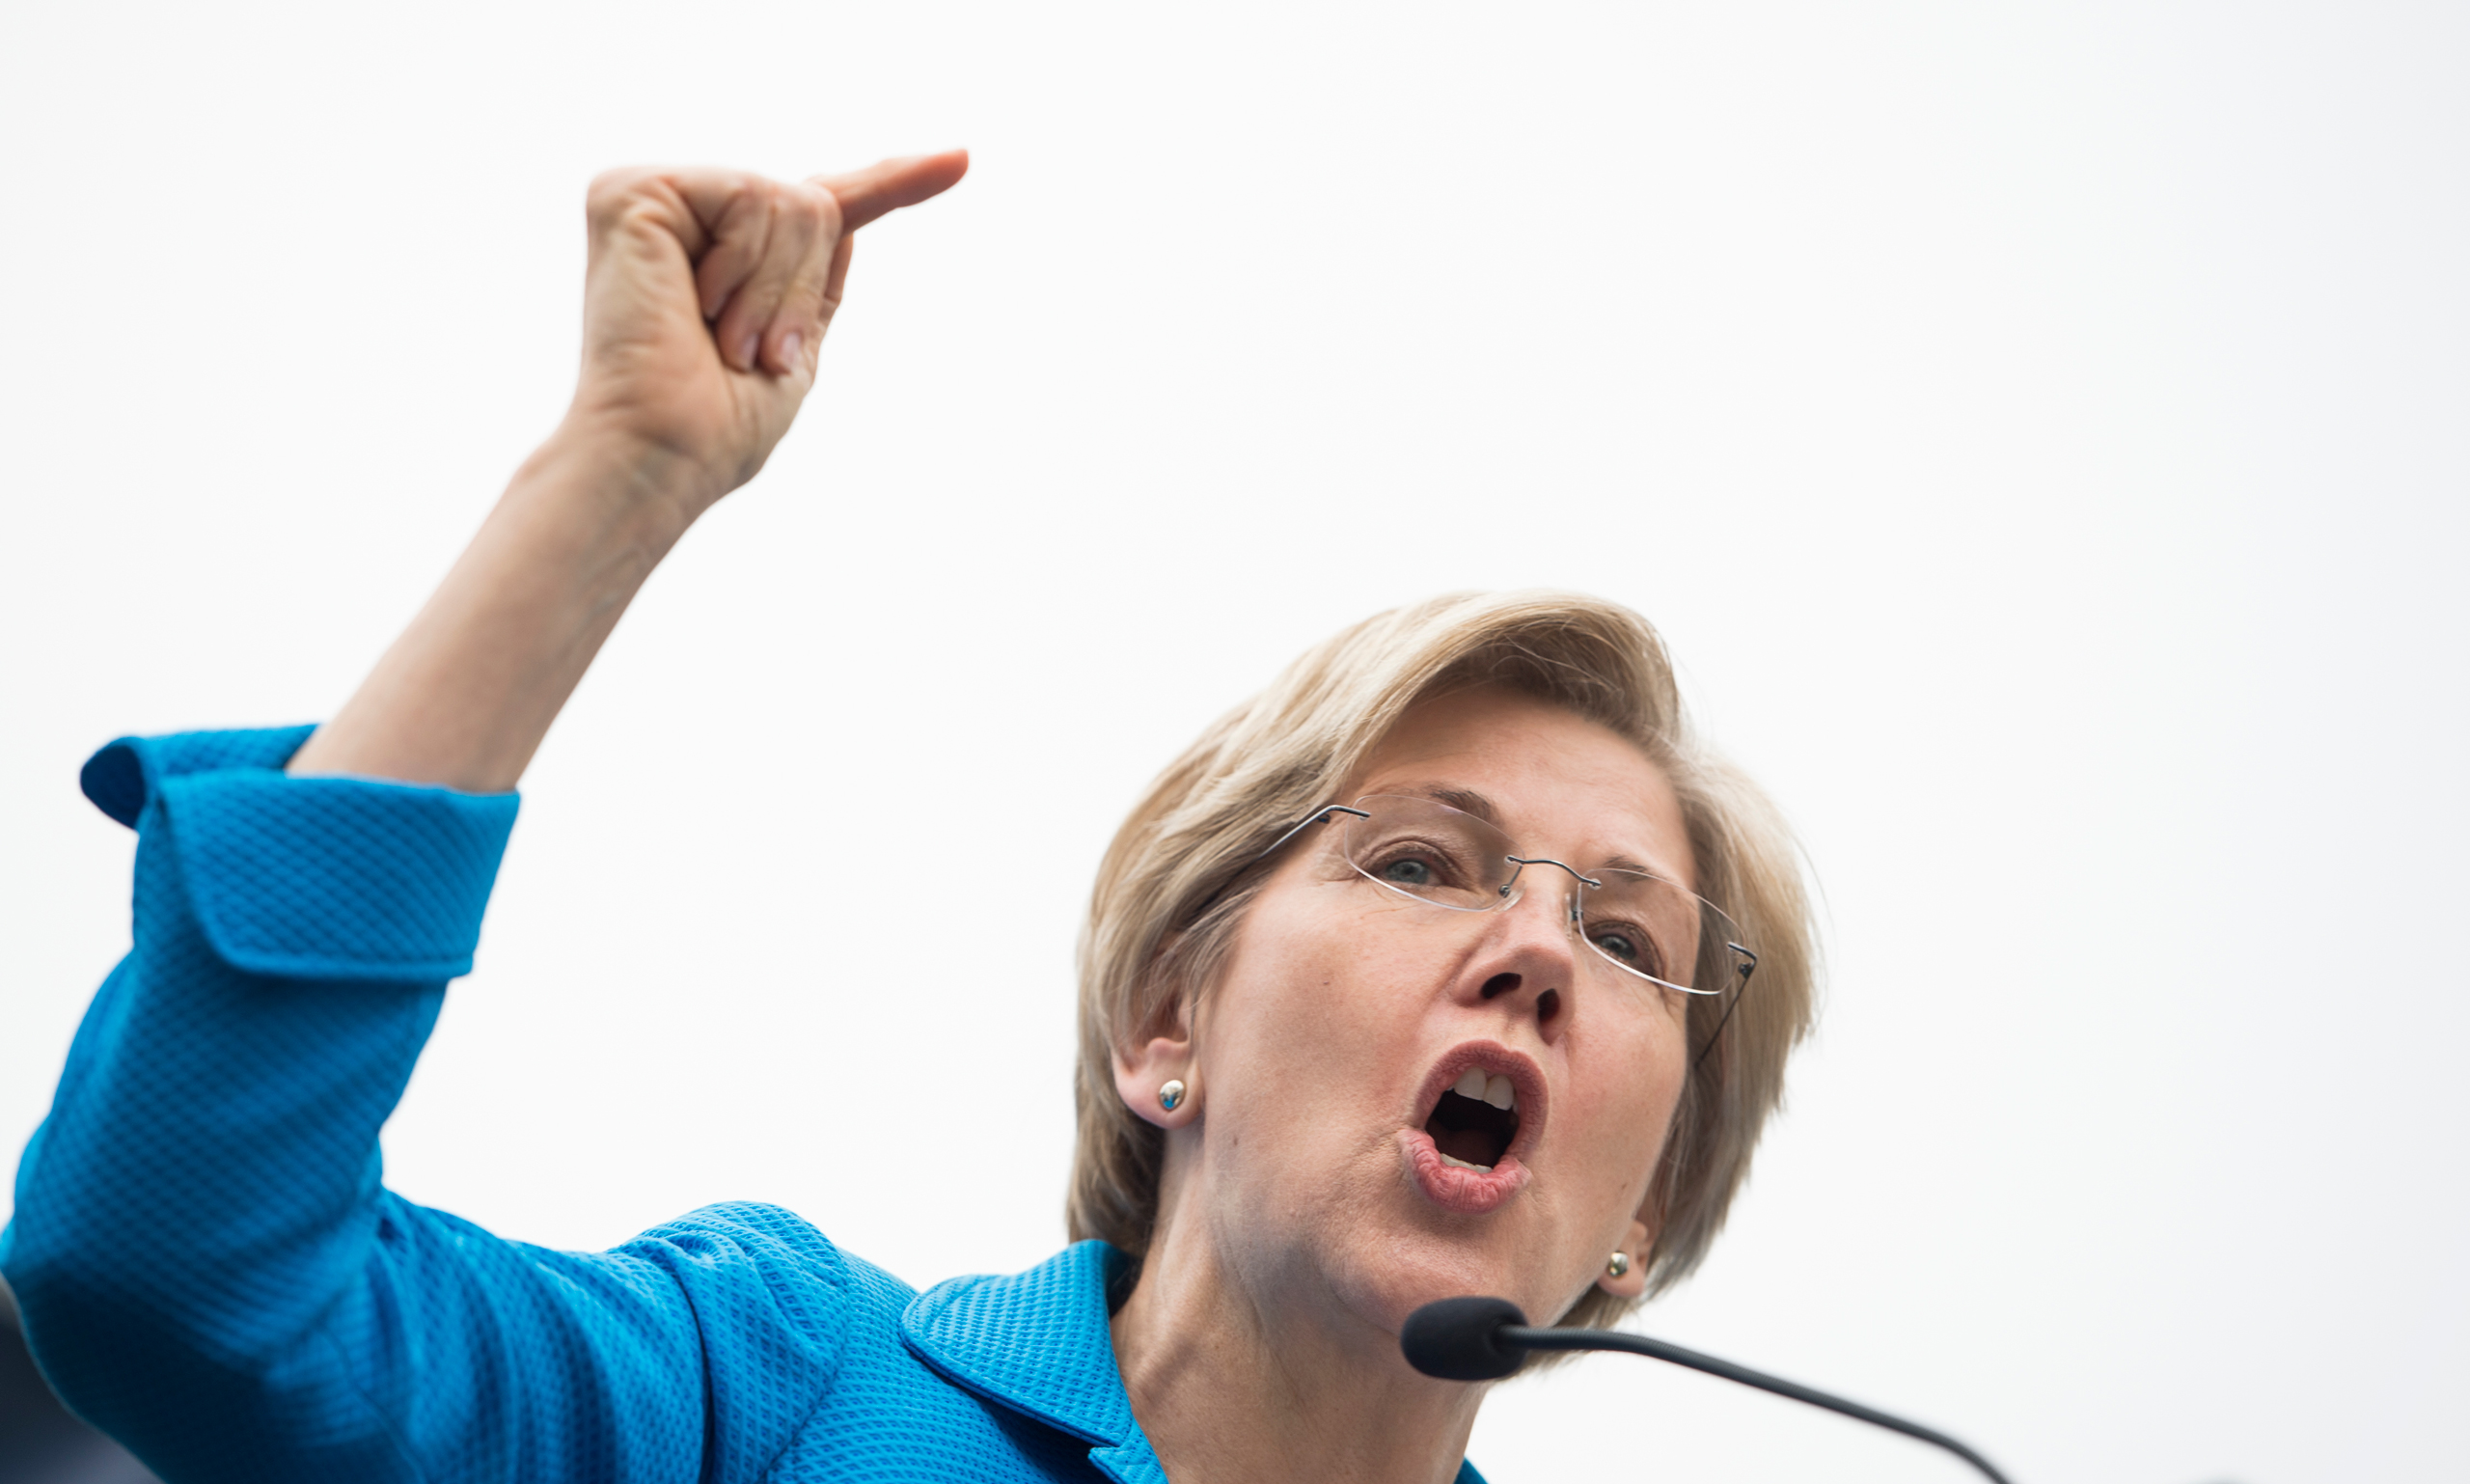 Sen. Elizabeth Warren, D-Mass., speaks during the United Steelworkers rally in opposition to the proposed 'Fast Track' bill, or Trade Promotion Authority, in UpperSenate Park on April 15, 2015. (Bill Clark—AP)